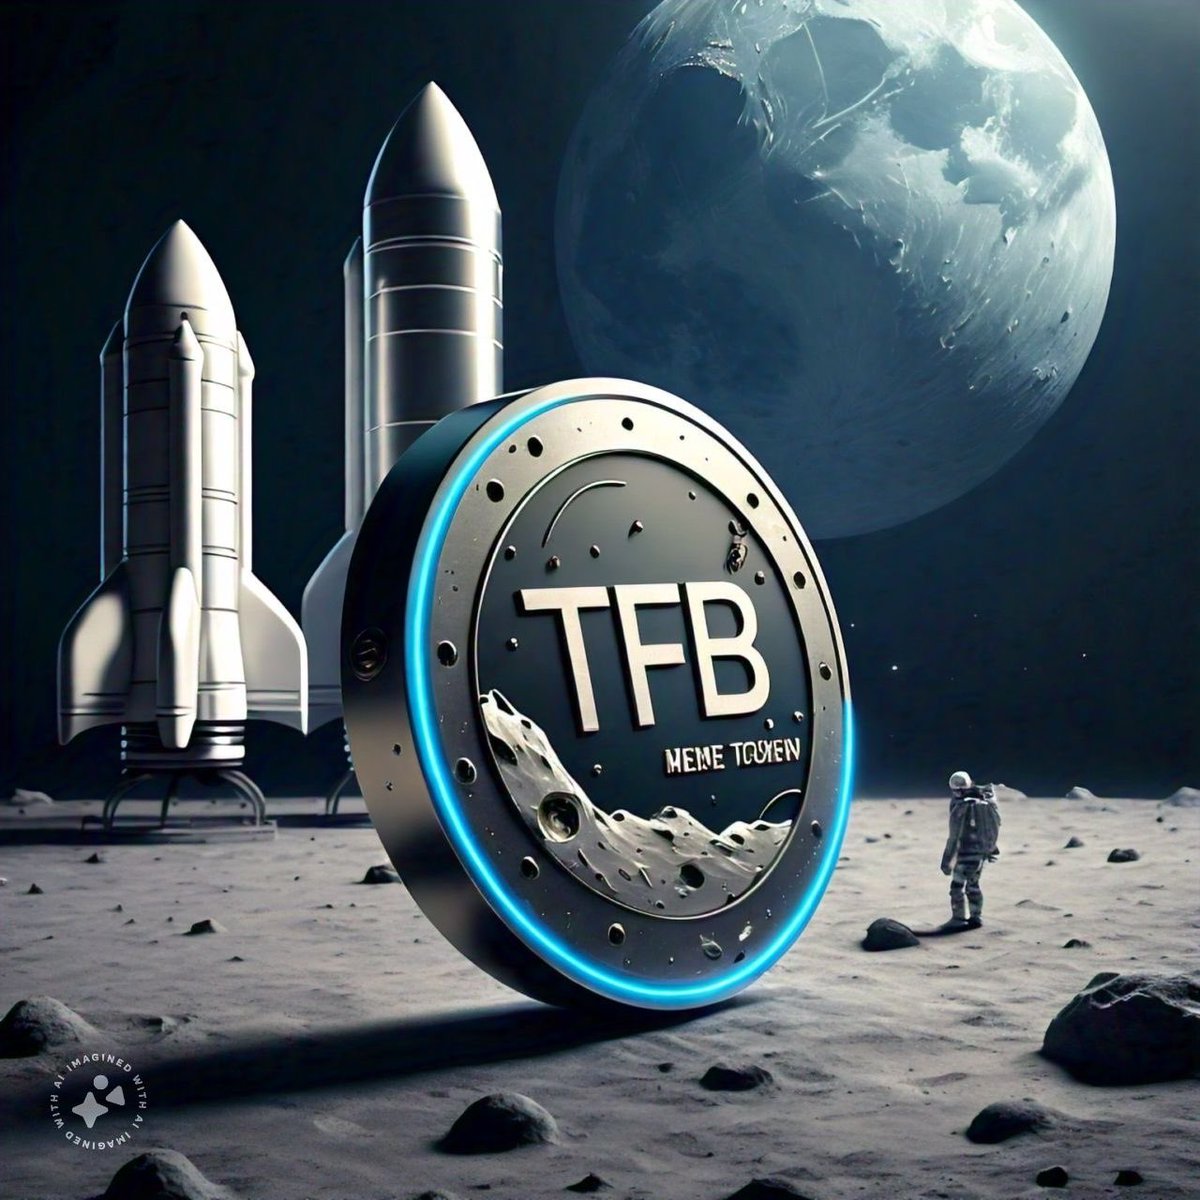 “TFB meme token isn’t just about laughs – it’s about building a community around the memes and people we love. 

Join now and let’s meme our way to the moon! 

🌕🚀 #TFB #Community #ToTheMoon”